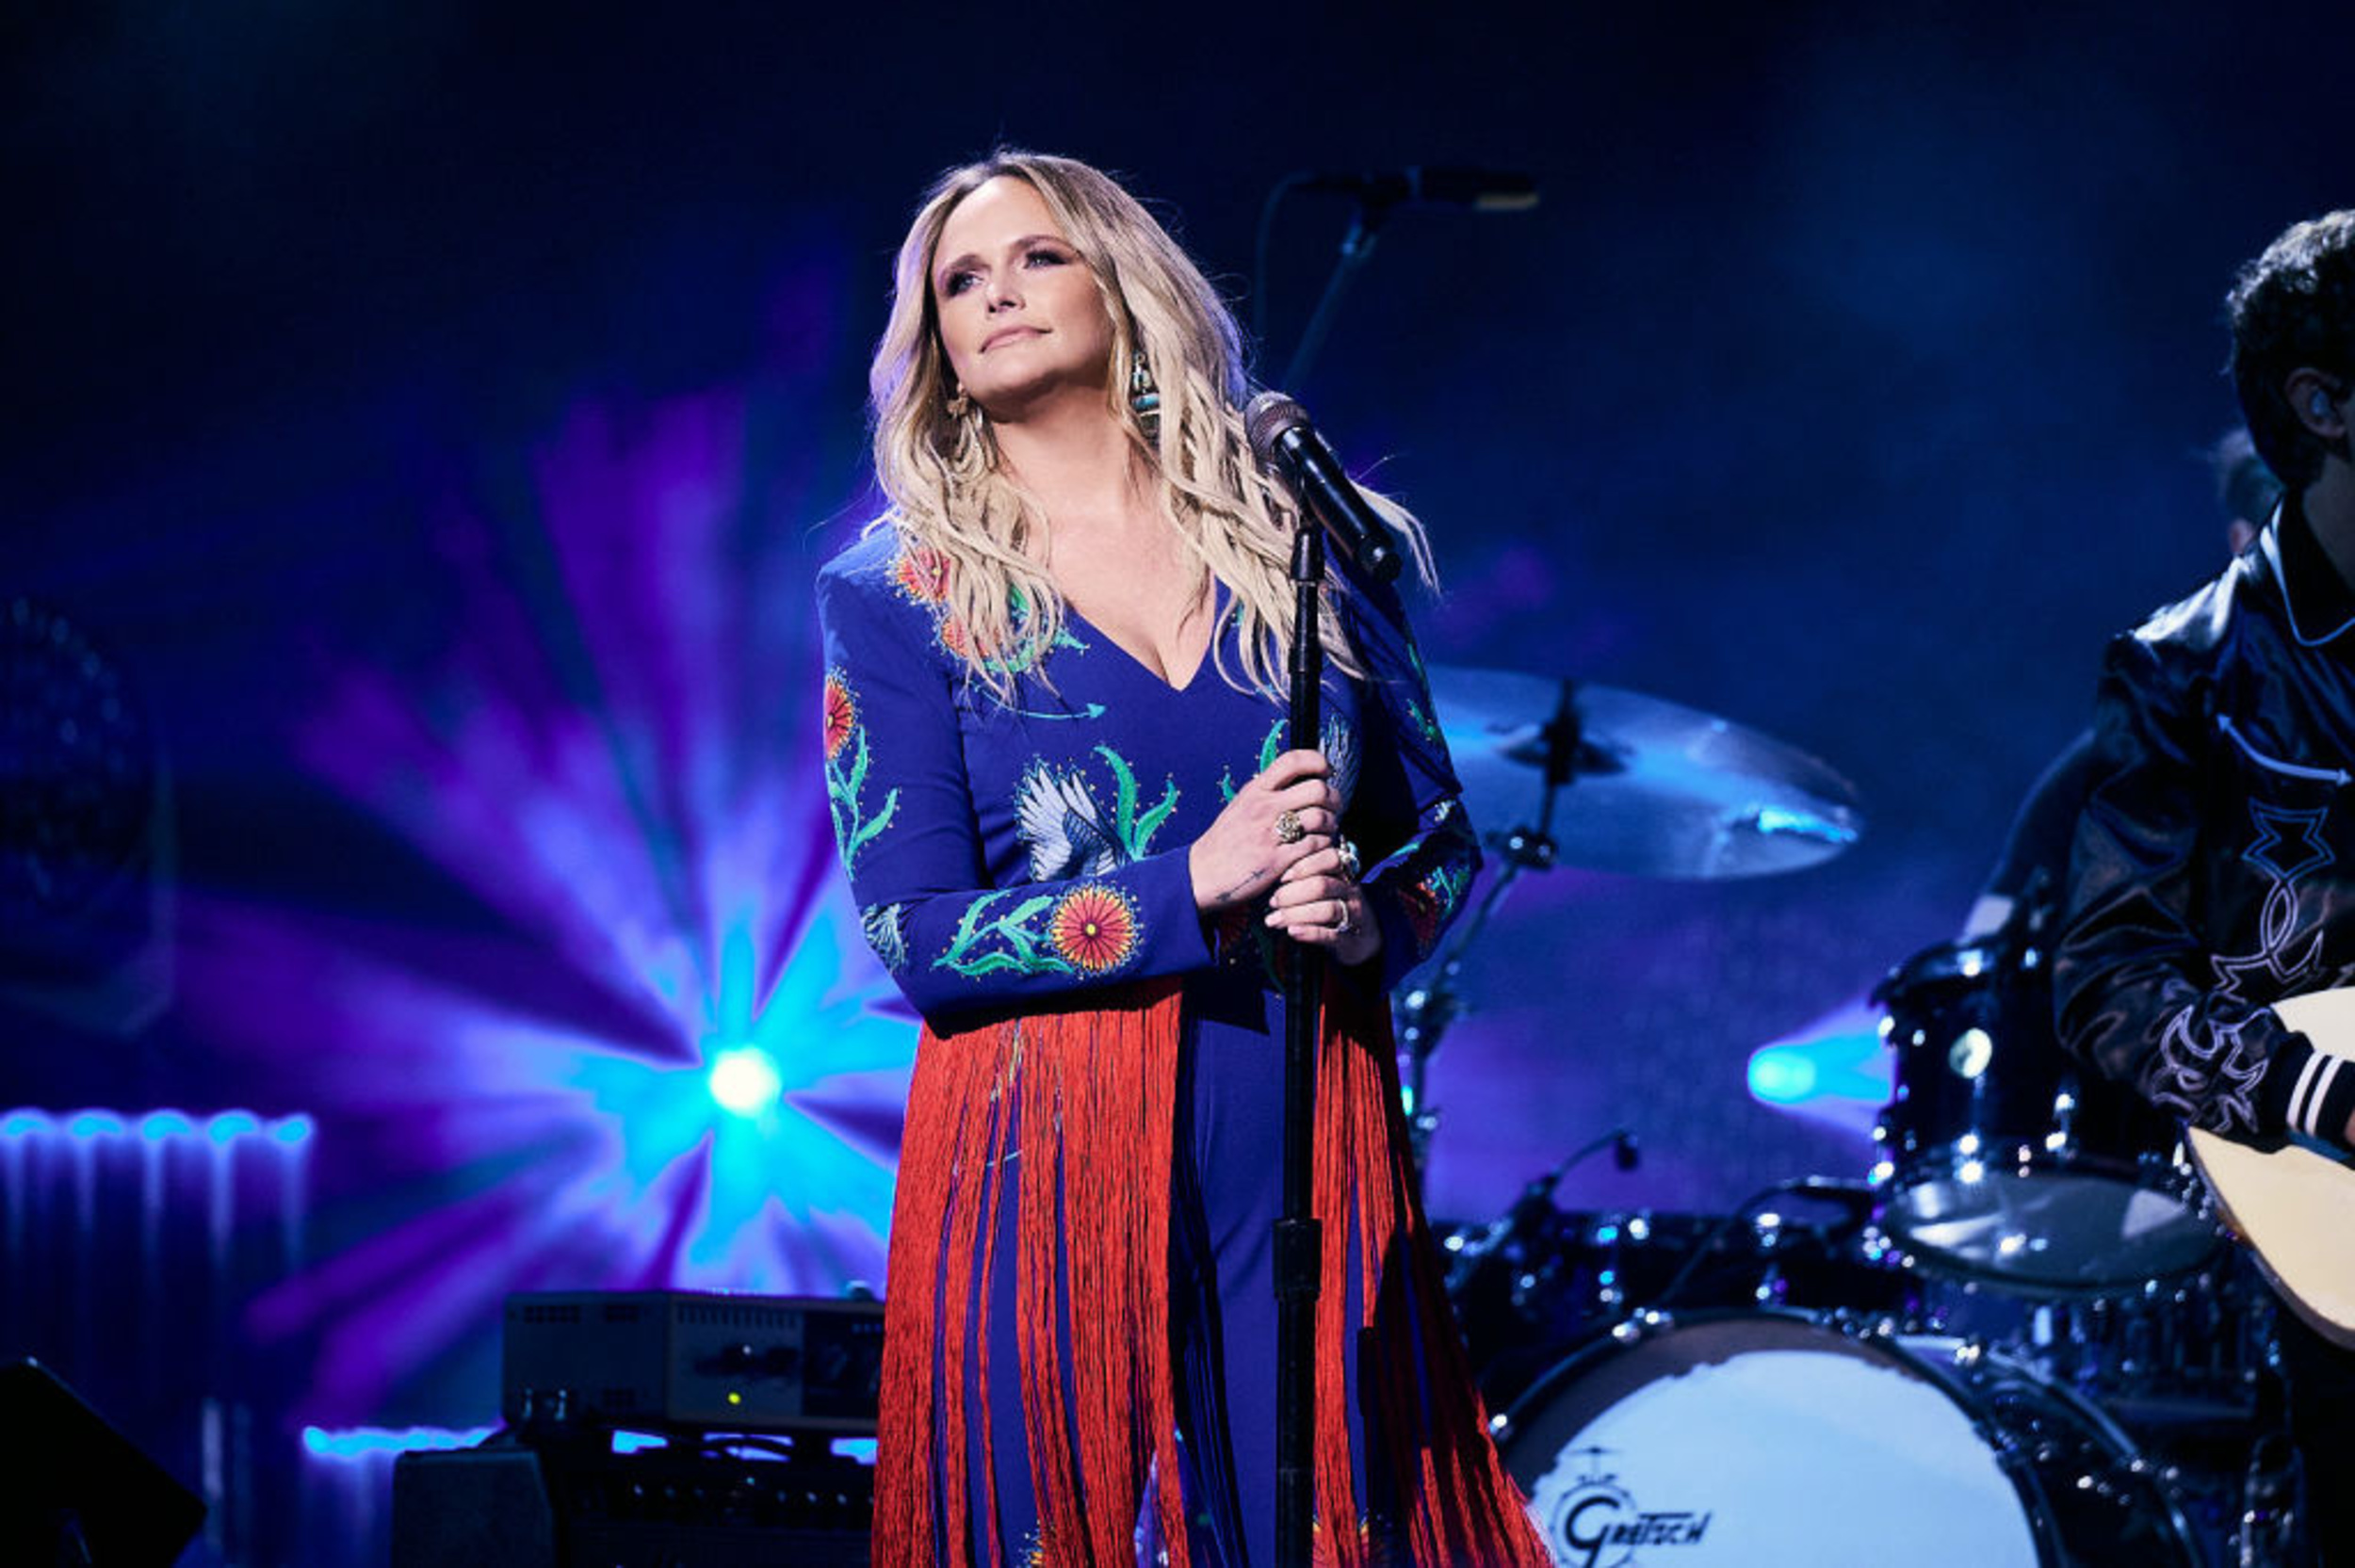 <p>Miranda Lambert's 2020 ballad "Settling Down" is essential for anyone who, like Lambert sings in this song, has their "feet on the ground and head up in the clouds." </p><p>You may also like: <a href='https://www.yardbarker.com/entertainment/articles/the_25_best_films_about_religious_figures_010324/s1__39340877'>The 25 best films about religious figures</a></p>